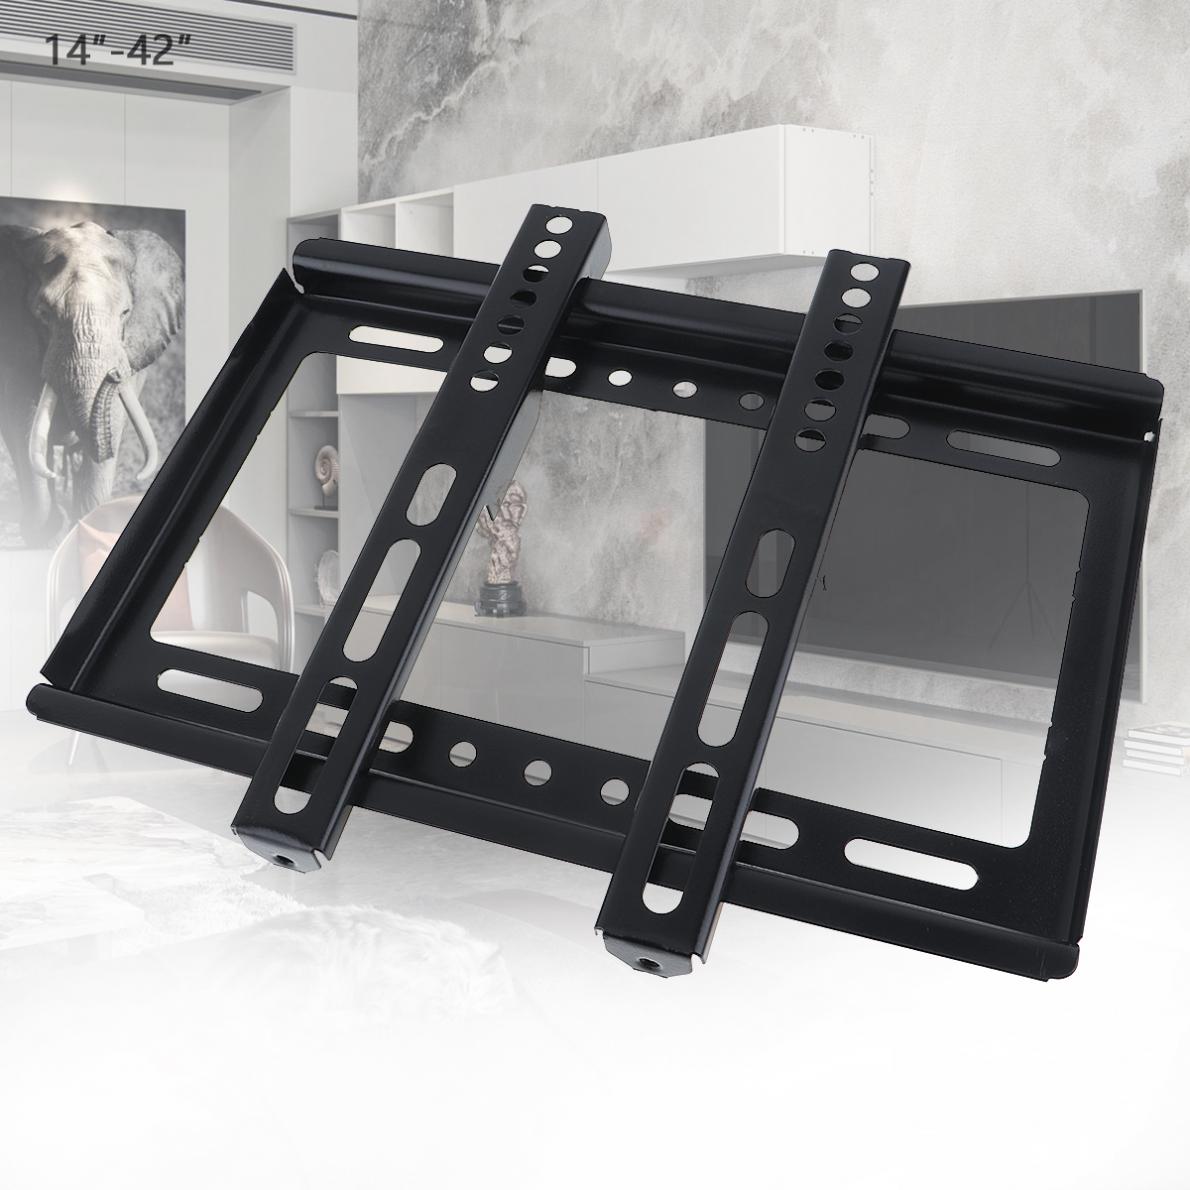 Universal Thin 25KG TV Wall Mount Bracket Flat  Panel  TV Frame with Gradienter for 14 - 42 Inch LCD LED Monitor Flat Pan